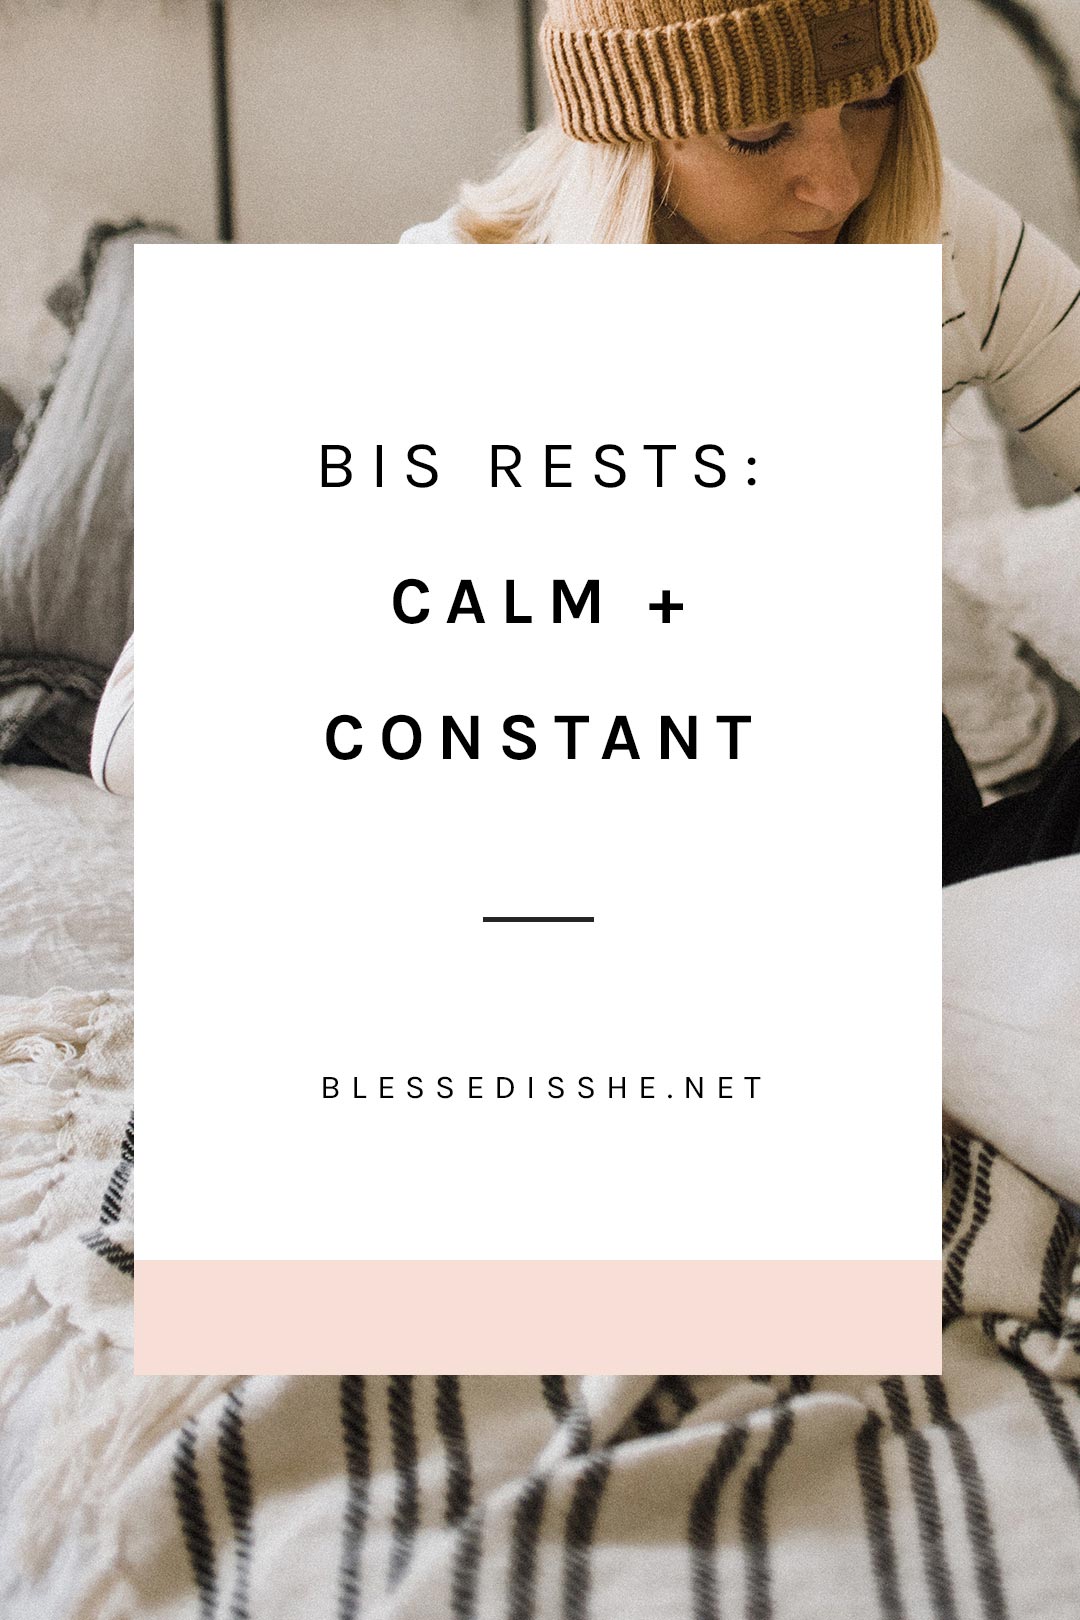 bis rests calm and constant